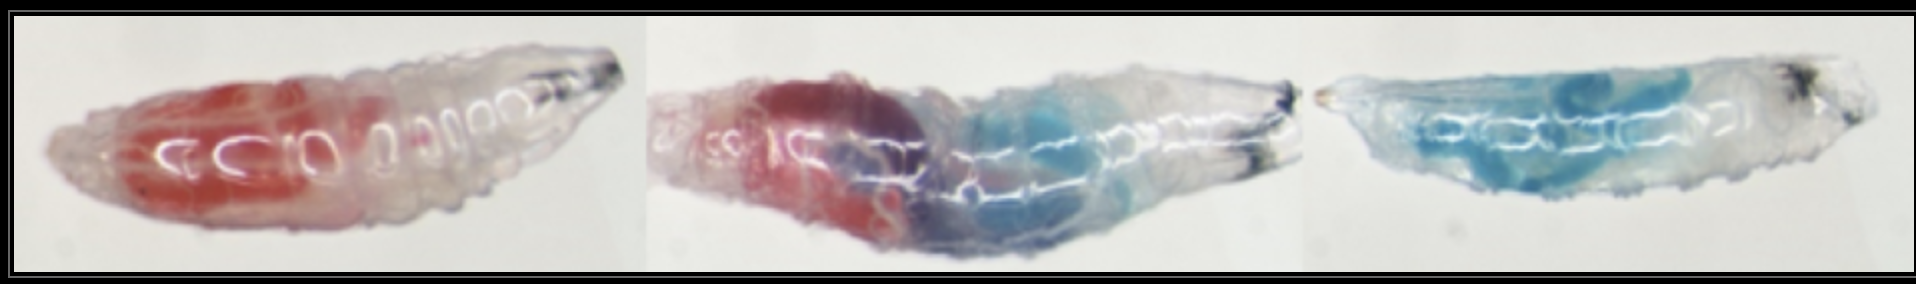 Figure 2. Images of SWD larvae fed on various yeasts dyed with food coloring. Photo courtesy of Hamby Lab, hambylab.weebly.com